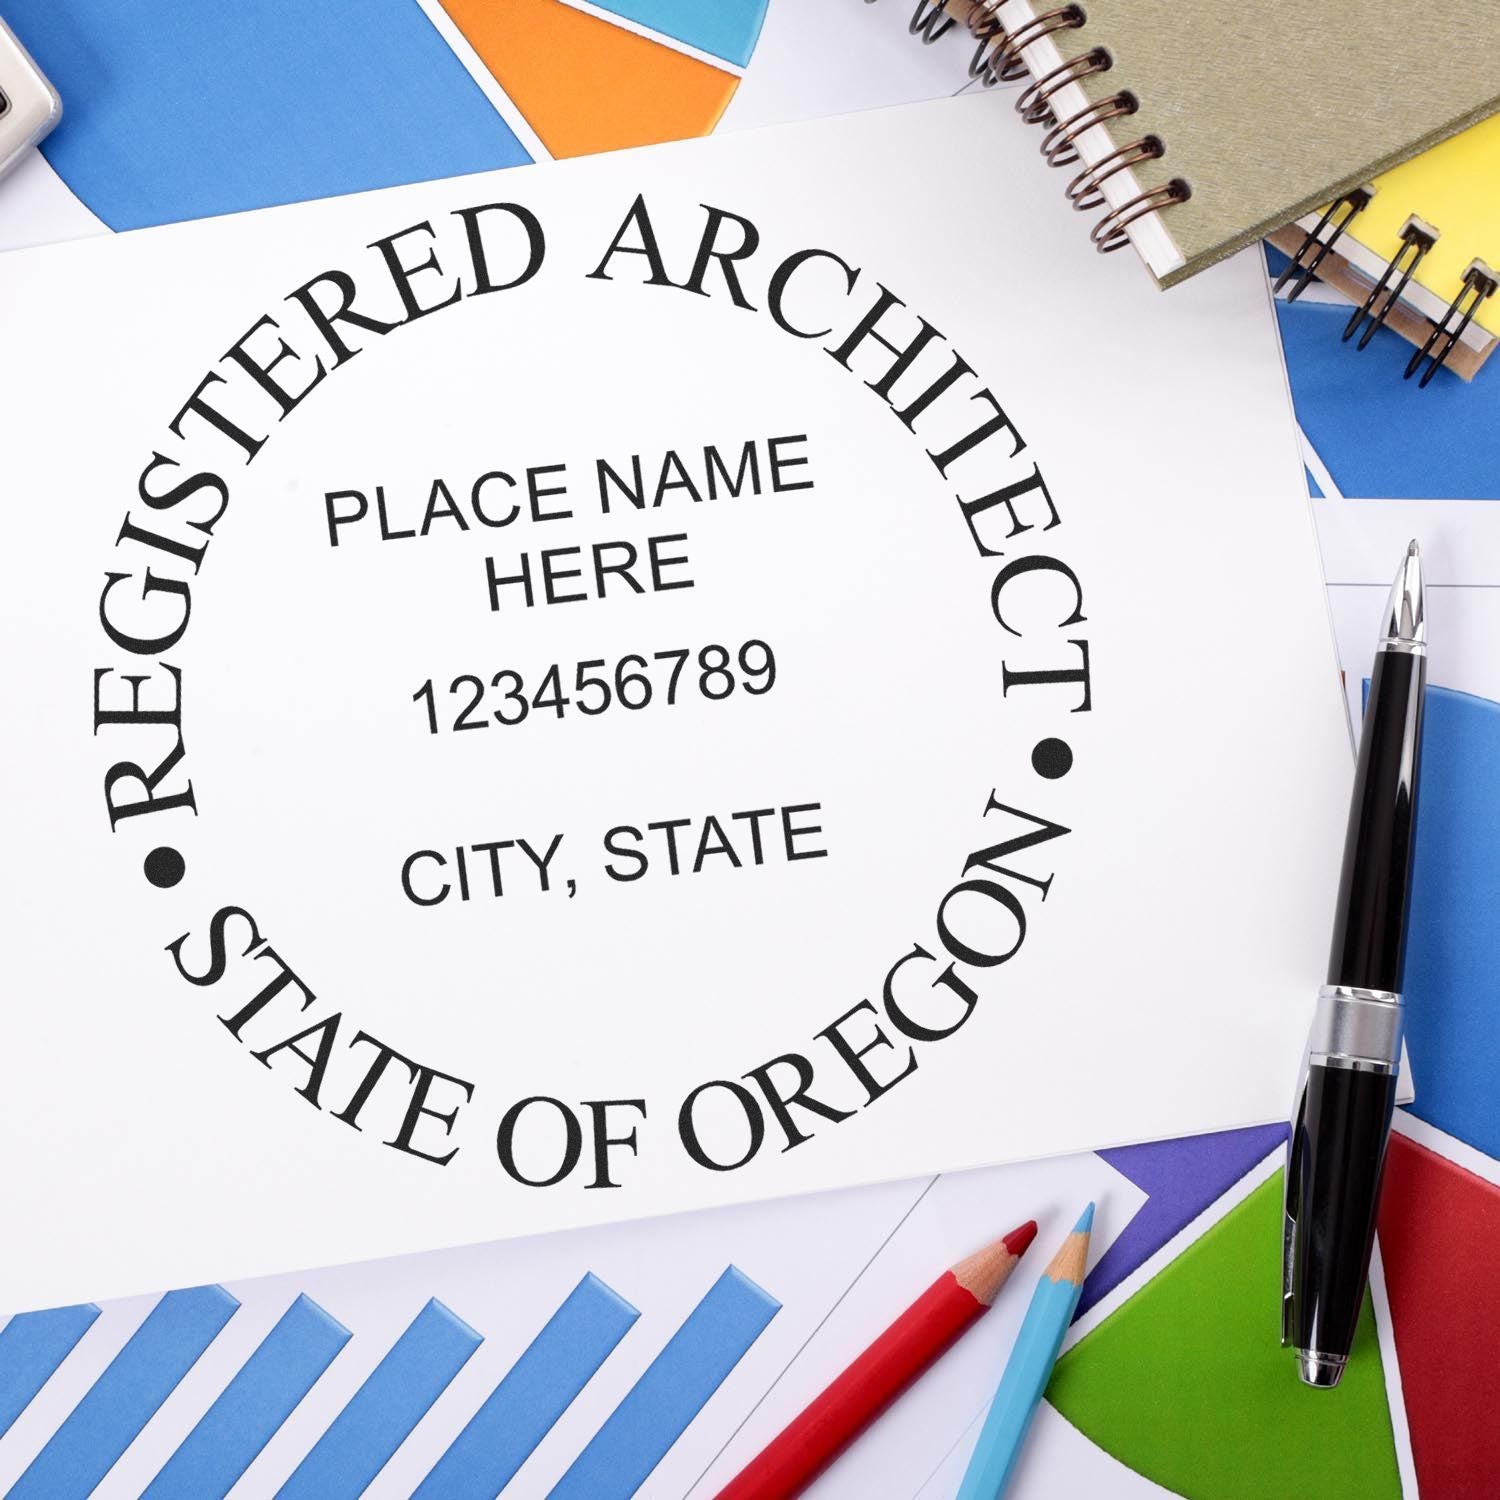 Renew with Ease: Oregon Architect Stamp Renewal Made Simple Feature Image